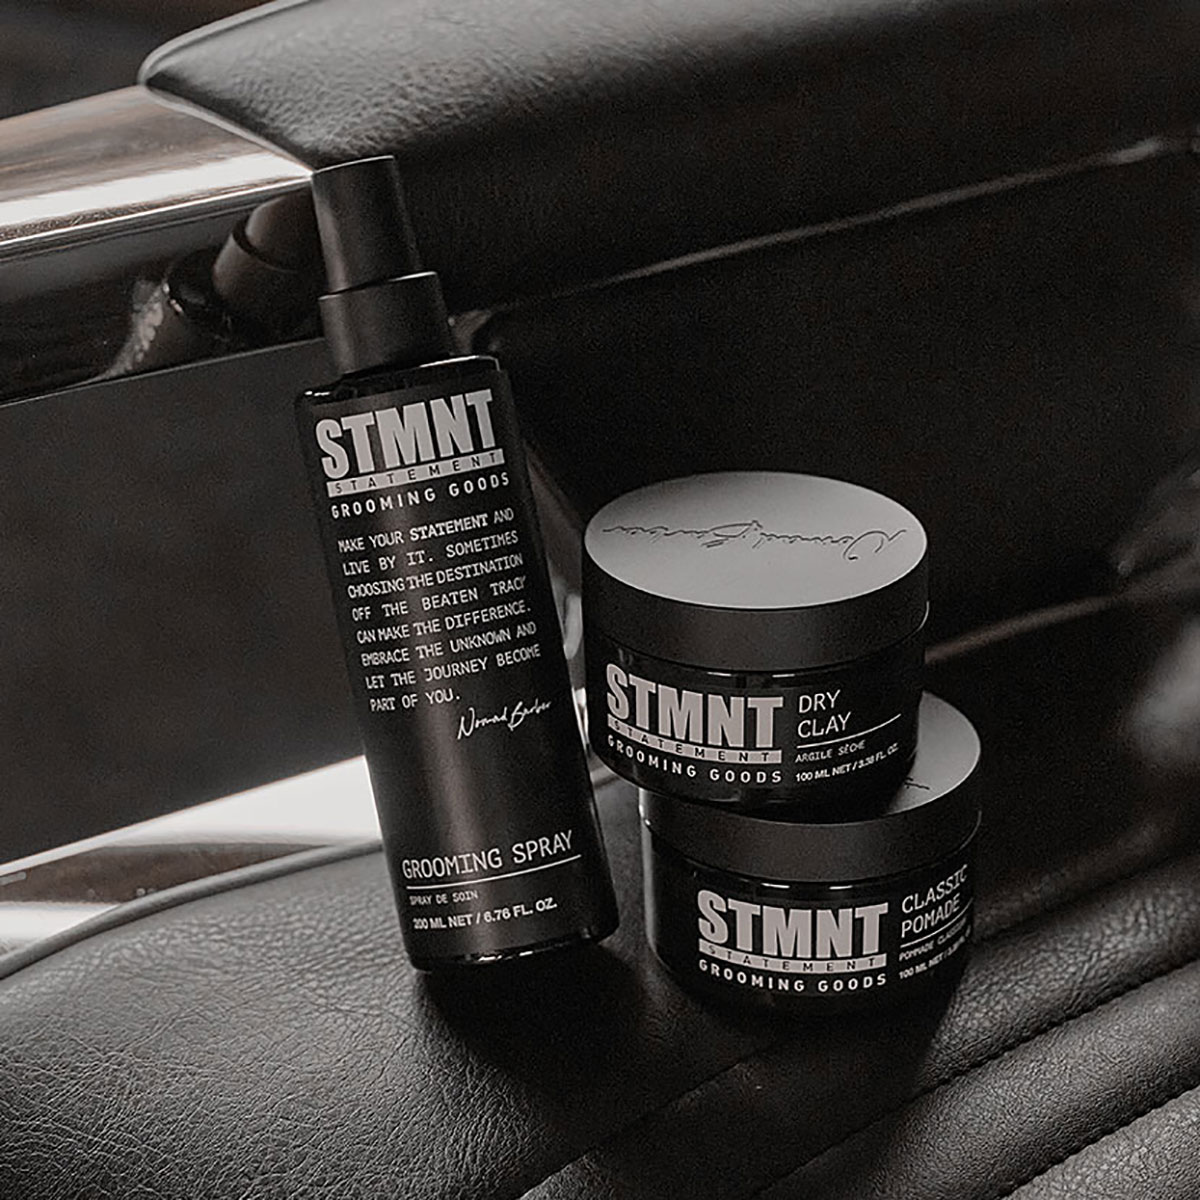 Nomad Barber Stmnt Grooming Products